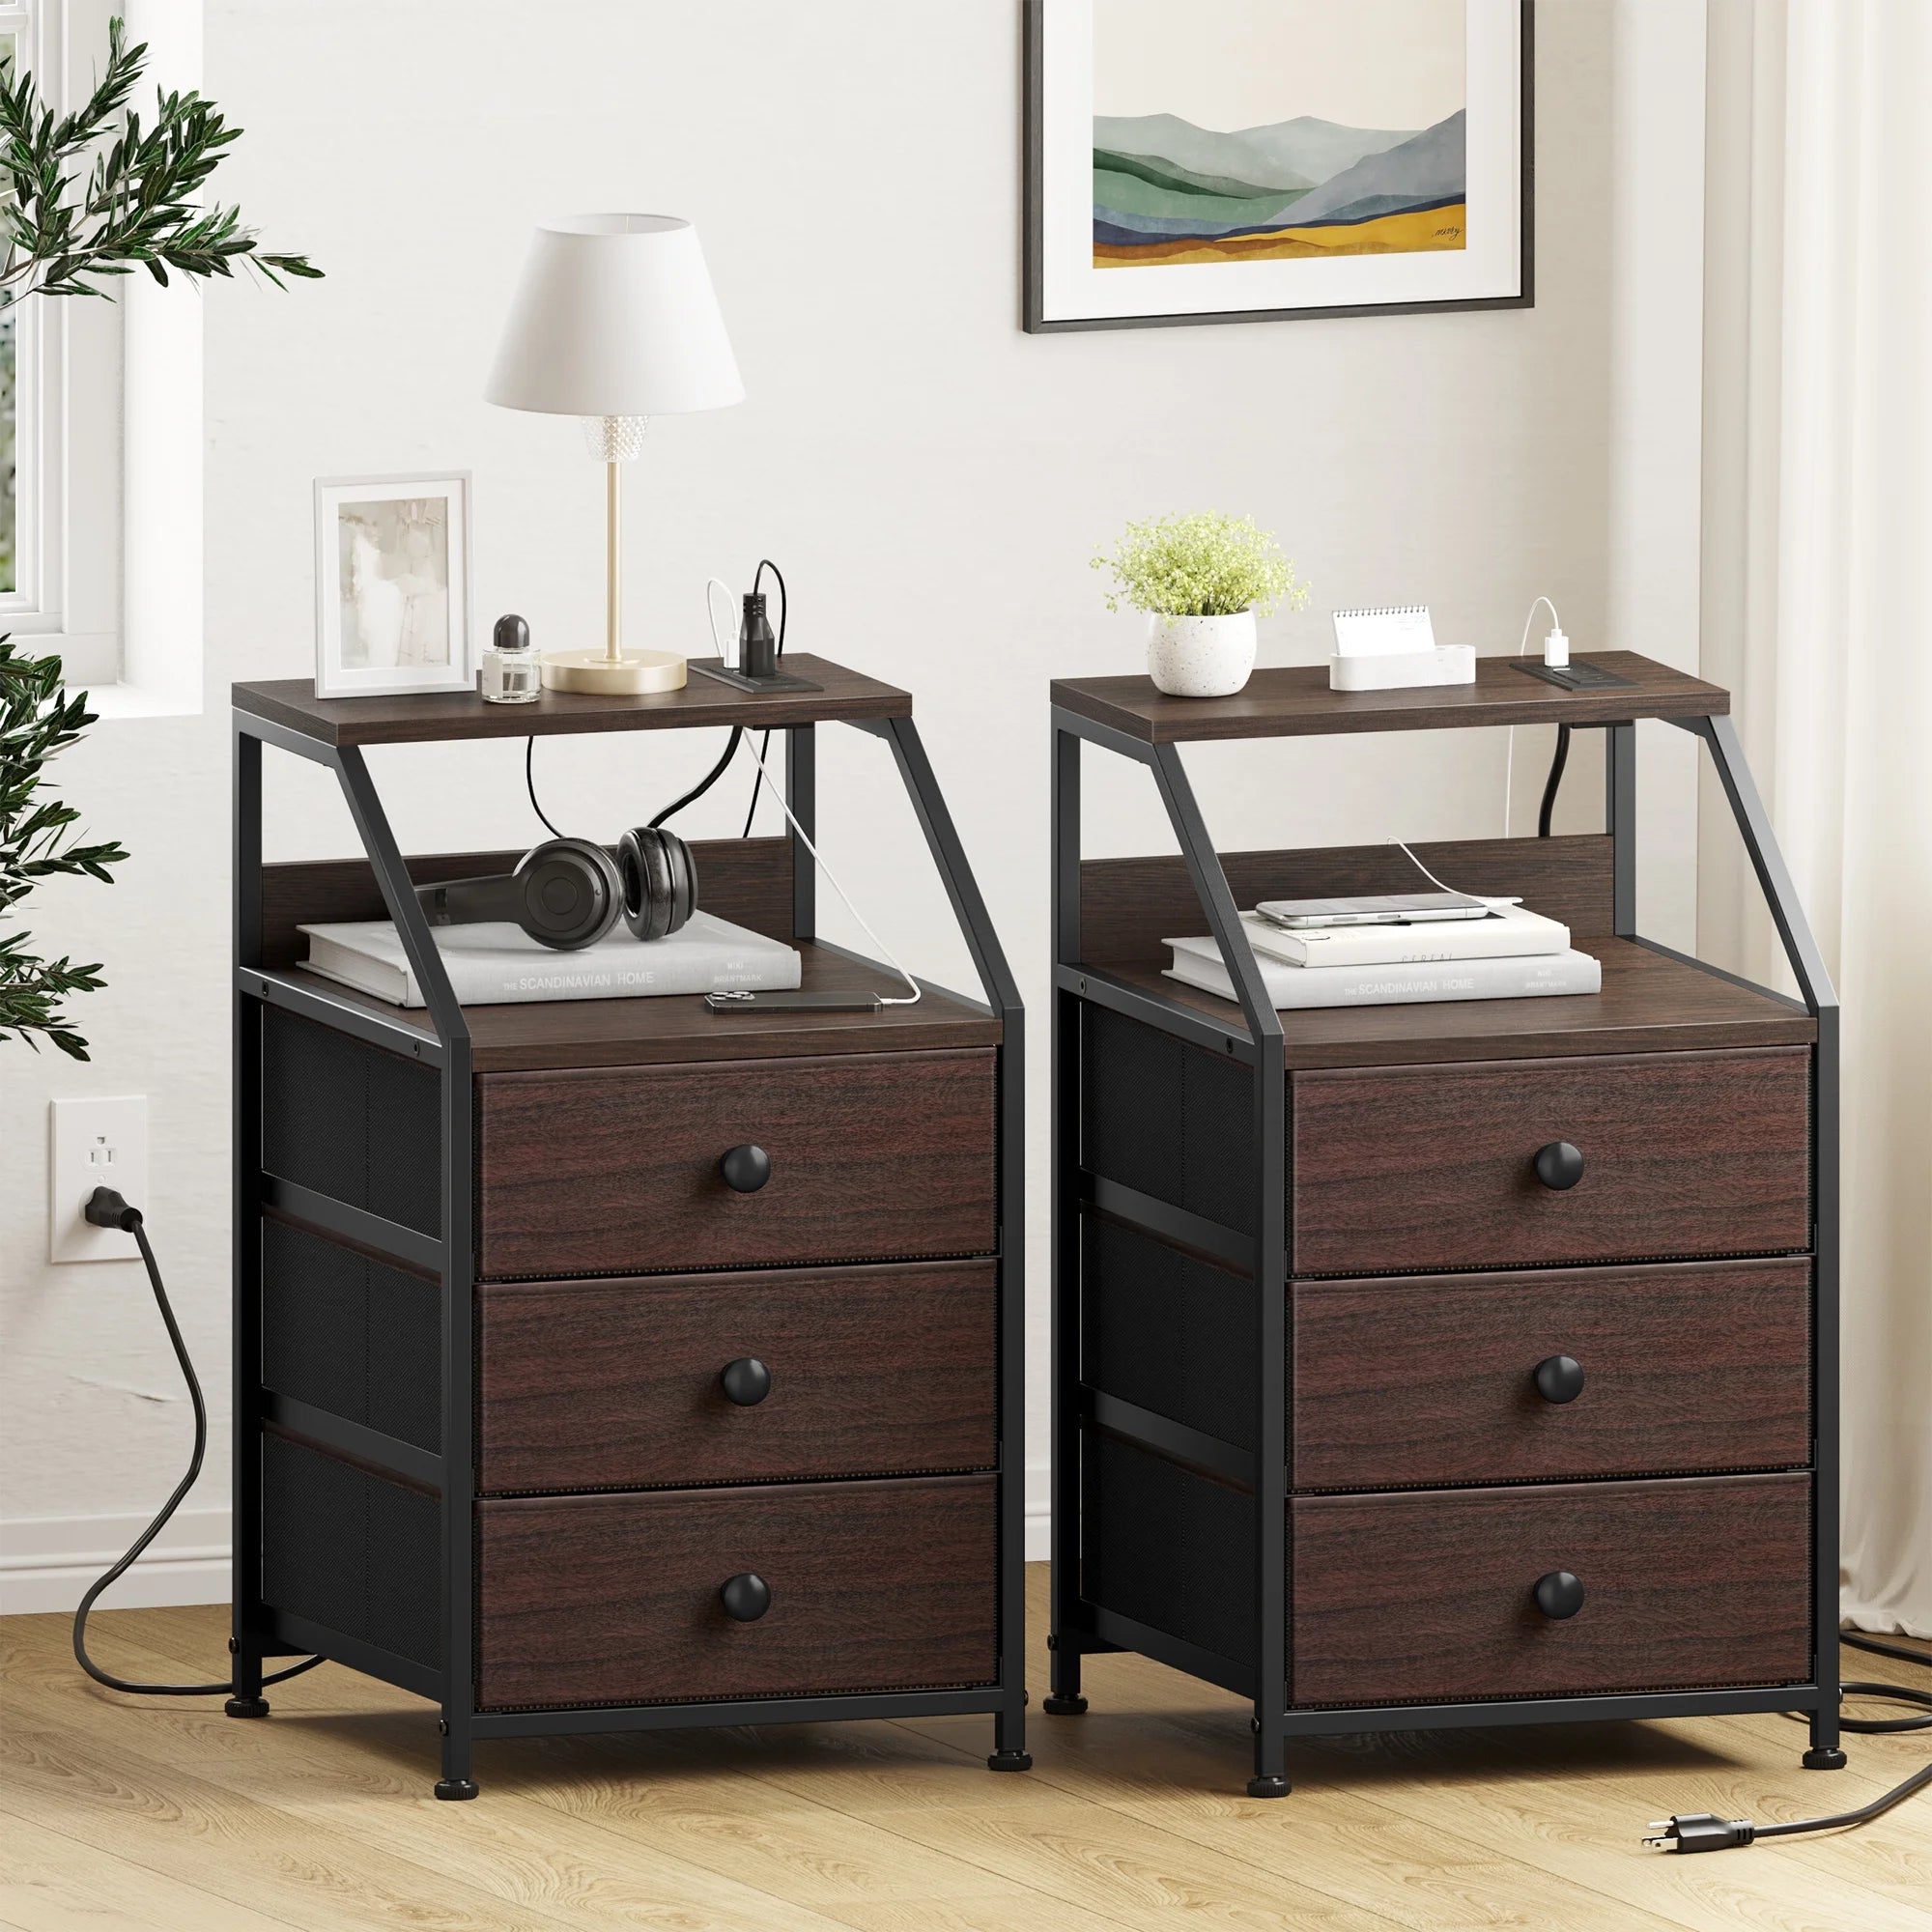 2 Nightstands with Charging Stations & USB Ports